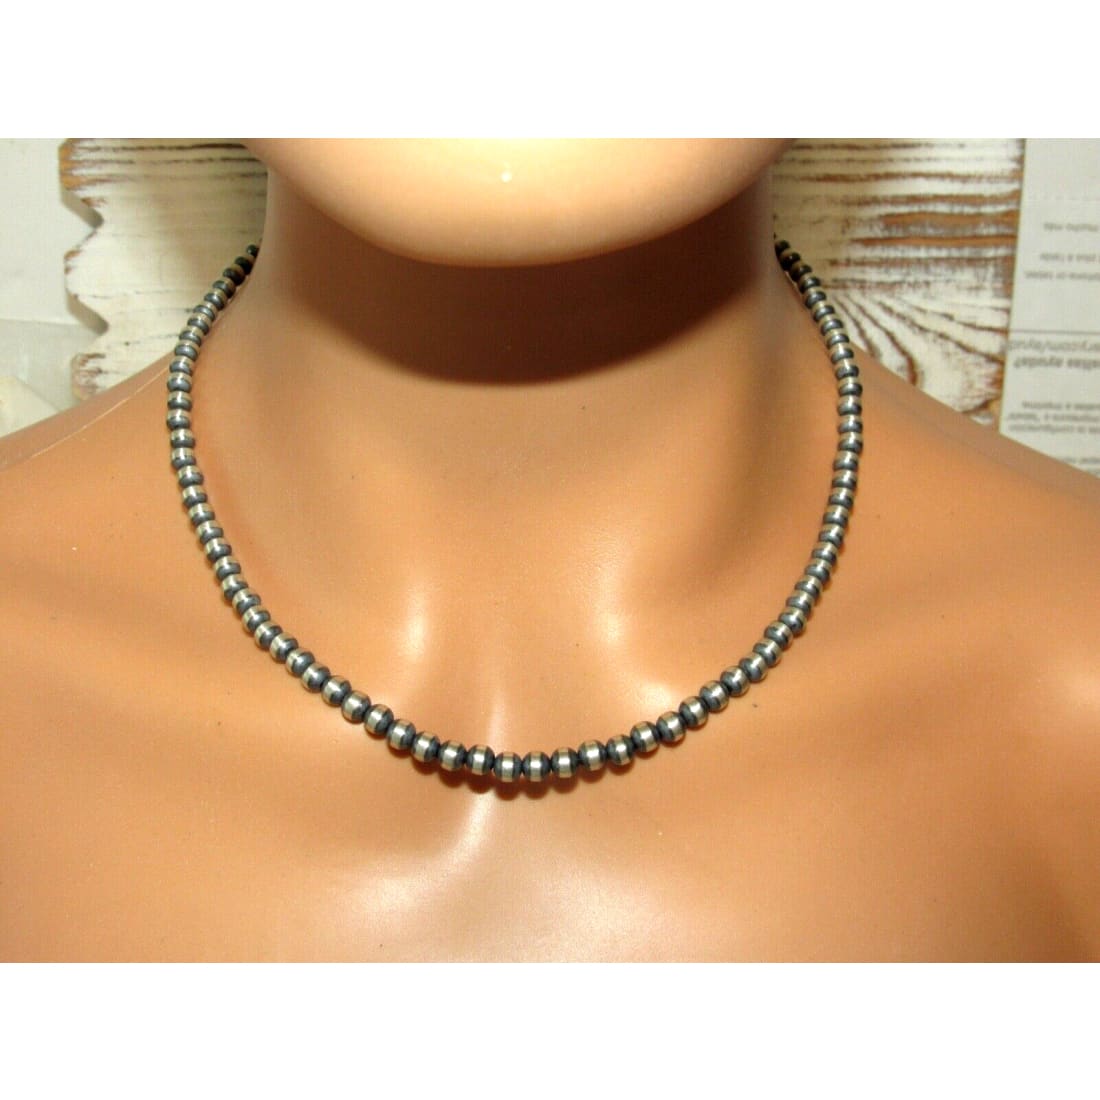 Navajo Pearls Necklace Sterling Silver 5mm Beads Necklace